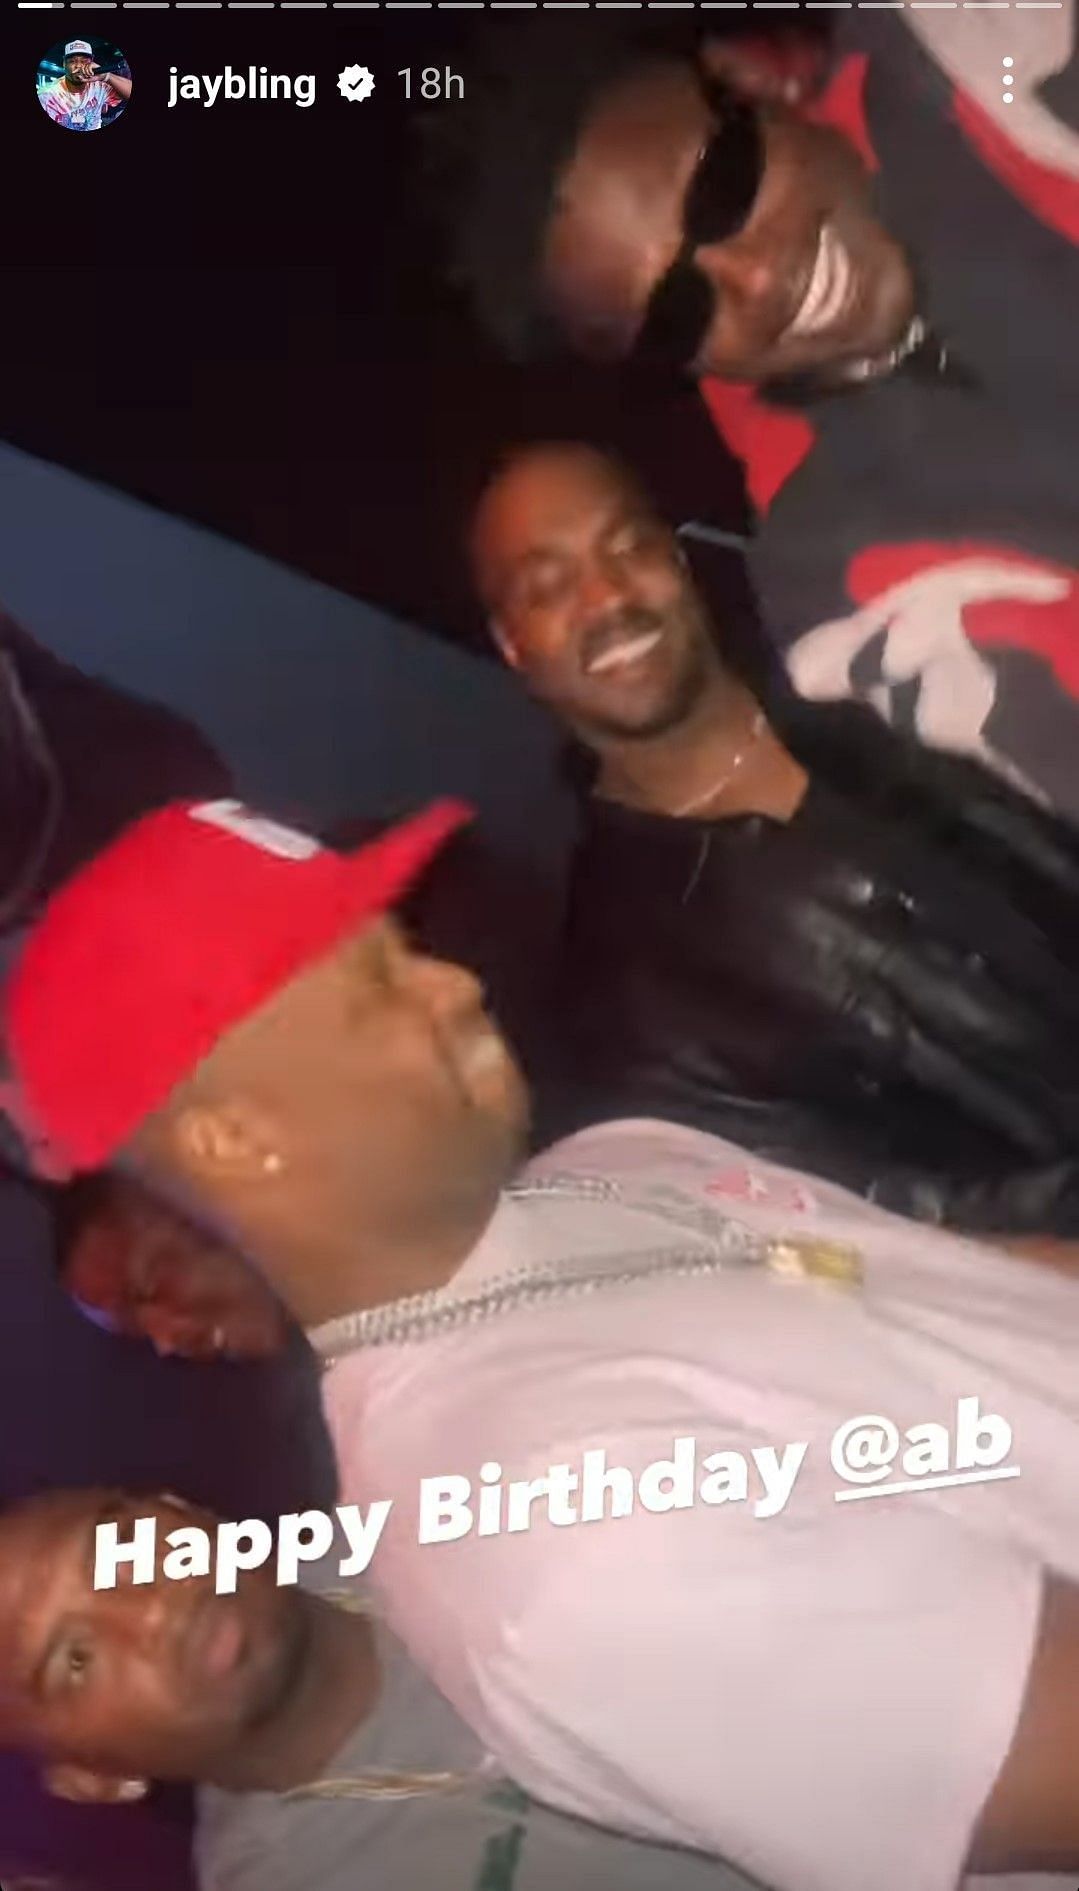 Kanye West partying with Antonio Brown